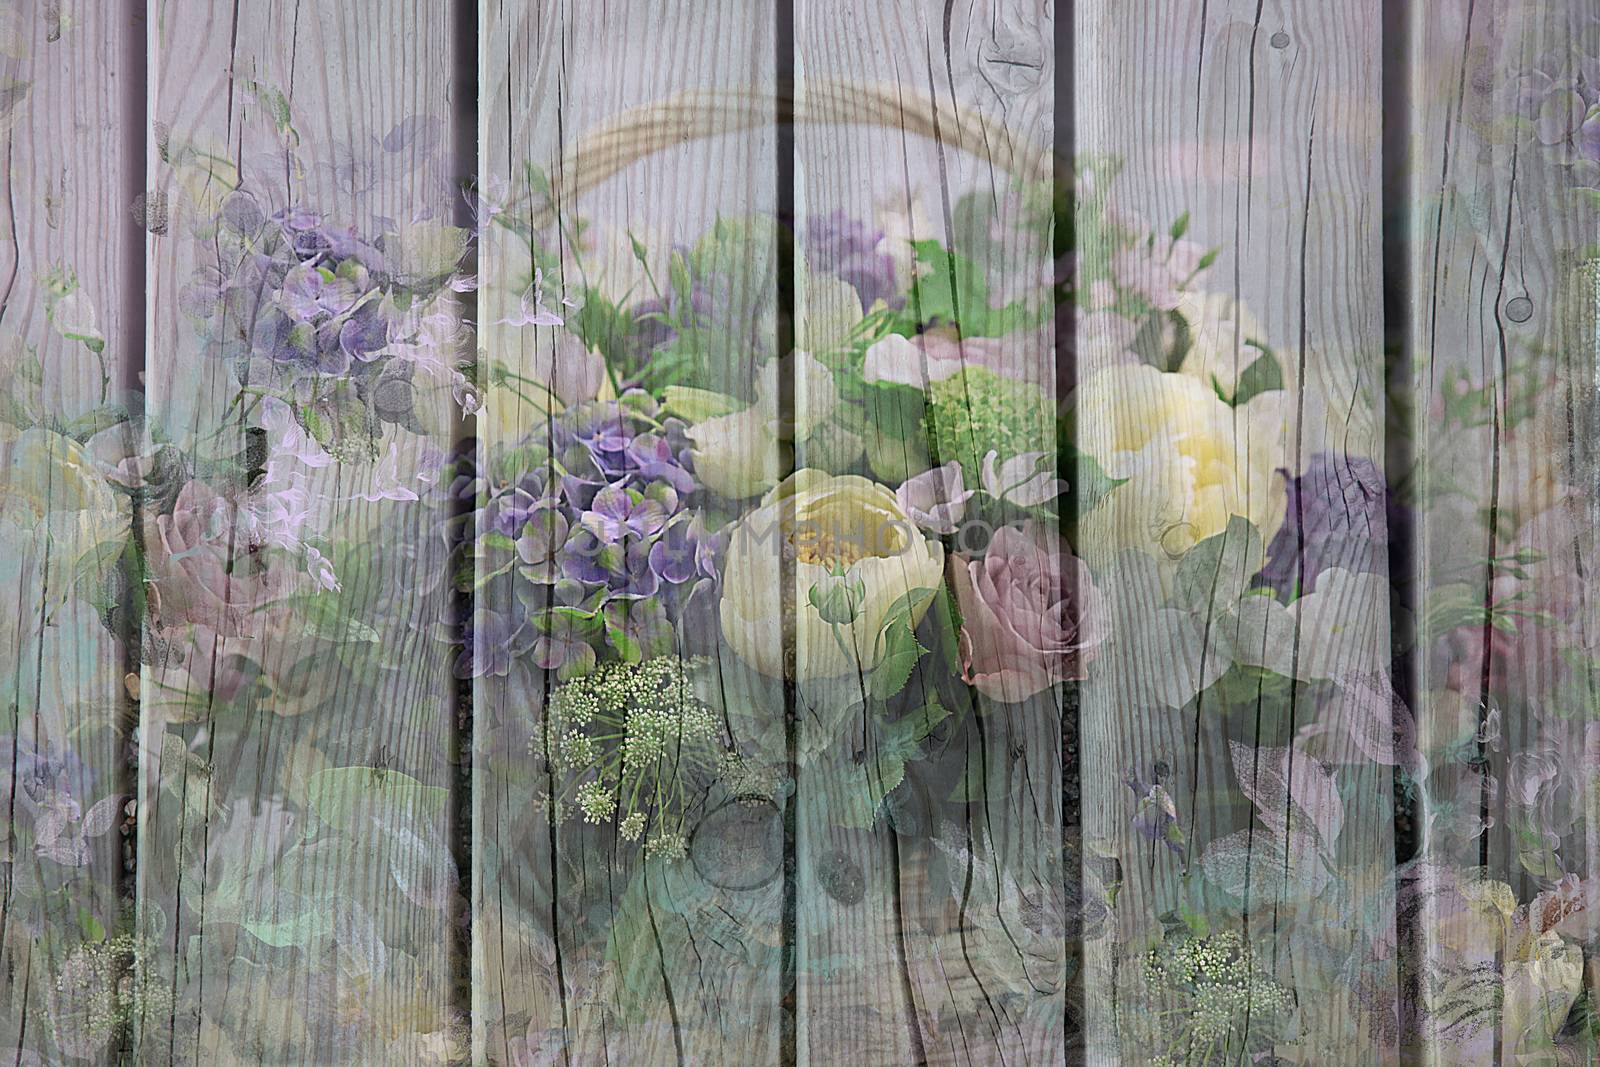 Wooden background with flowers